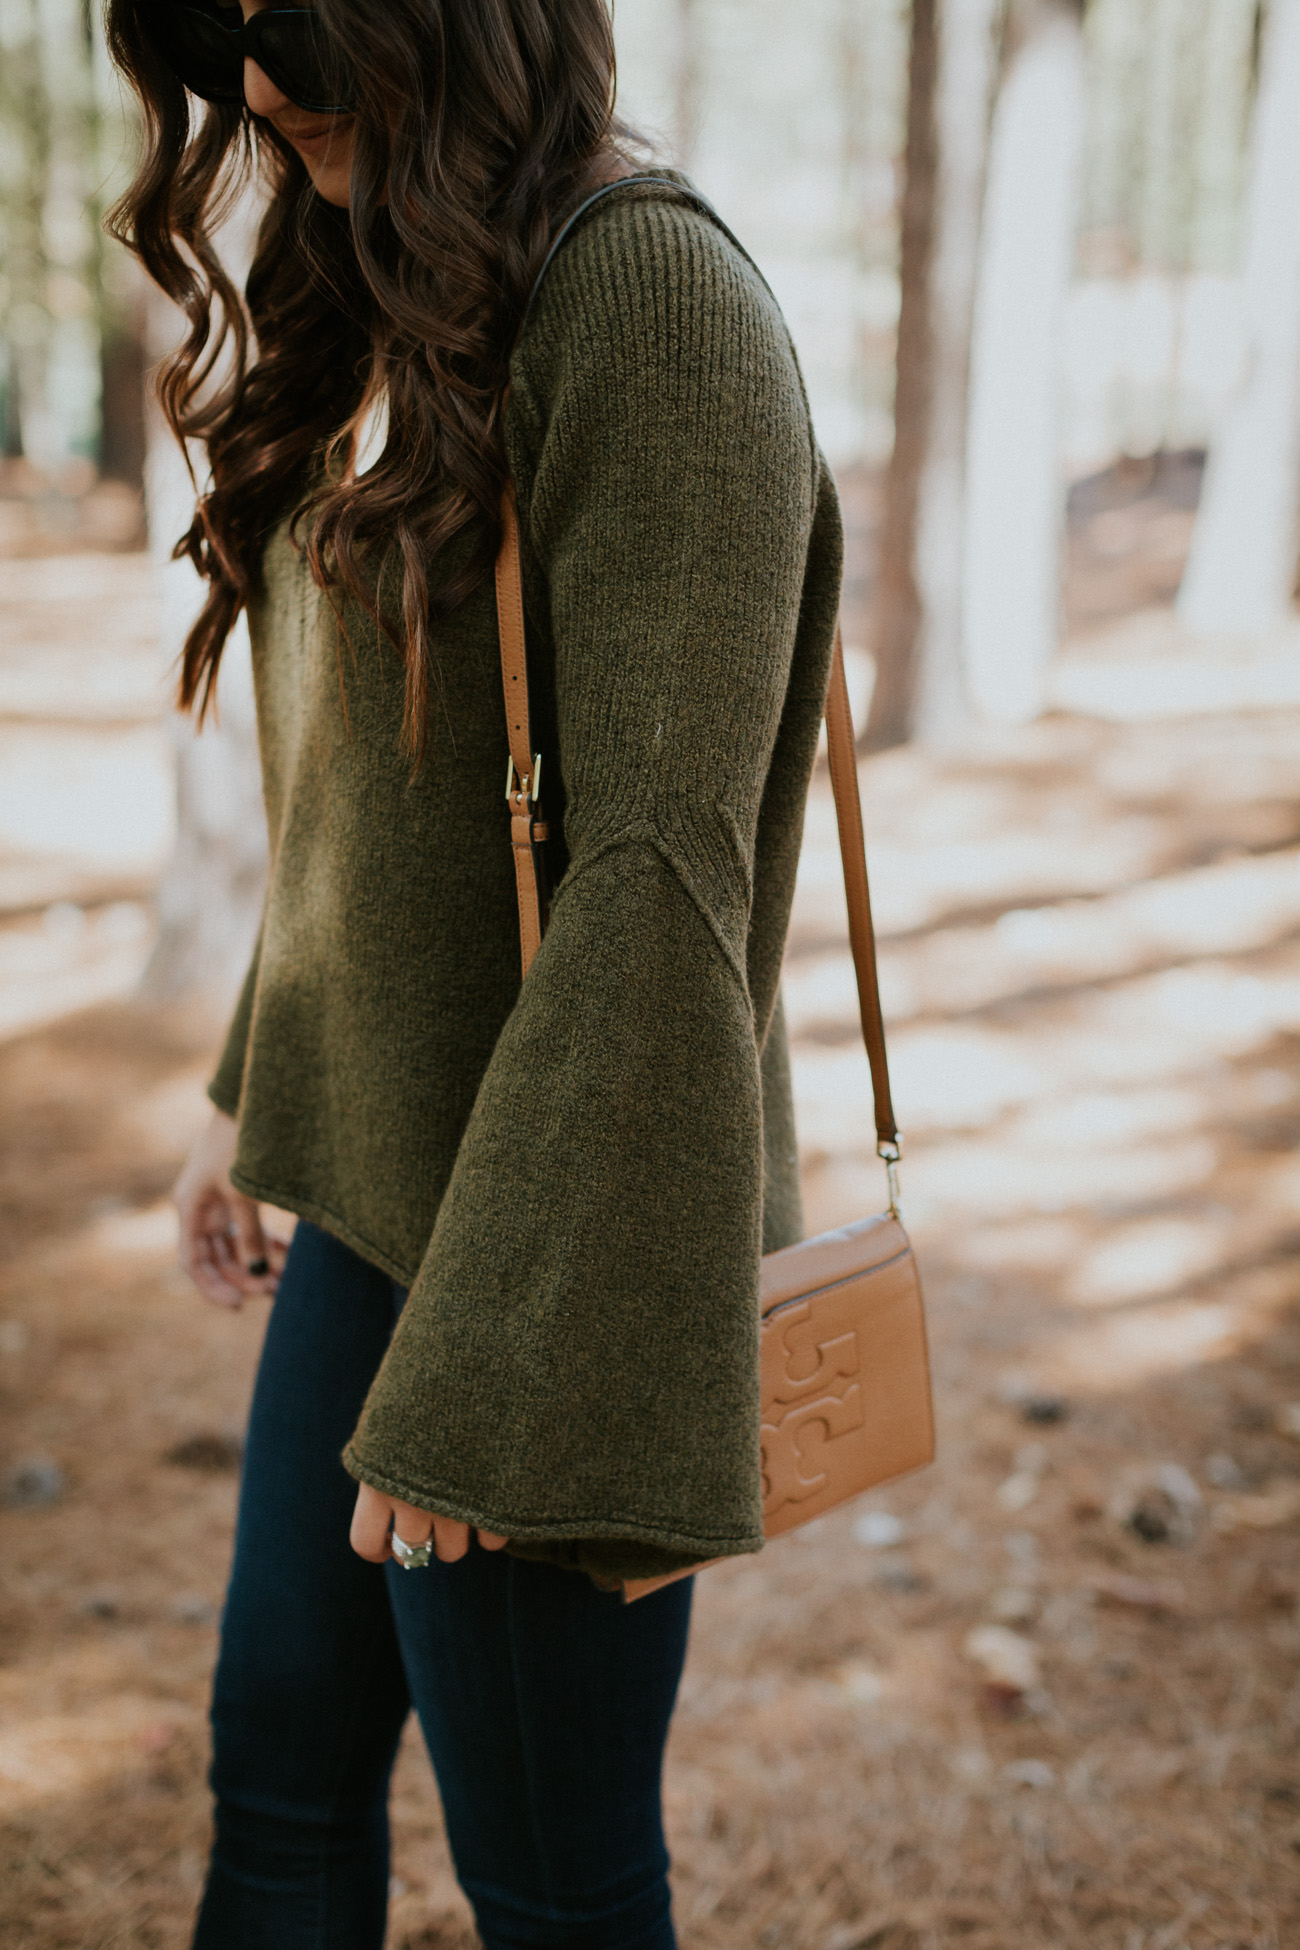 bell sleeve sweater, monogram necklace, free people sweater, fall style, fall fashion, vince camuto lehanna bootie, lace up bootie, cognac bootie, acrylic monogram necklace, celine sunglasses, cute fall outfit // grace wainwright a southern drawl